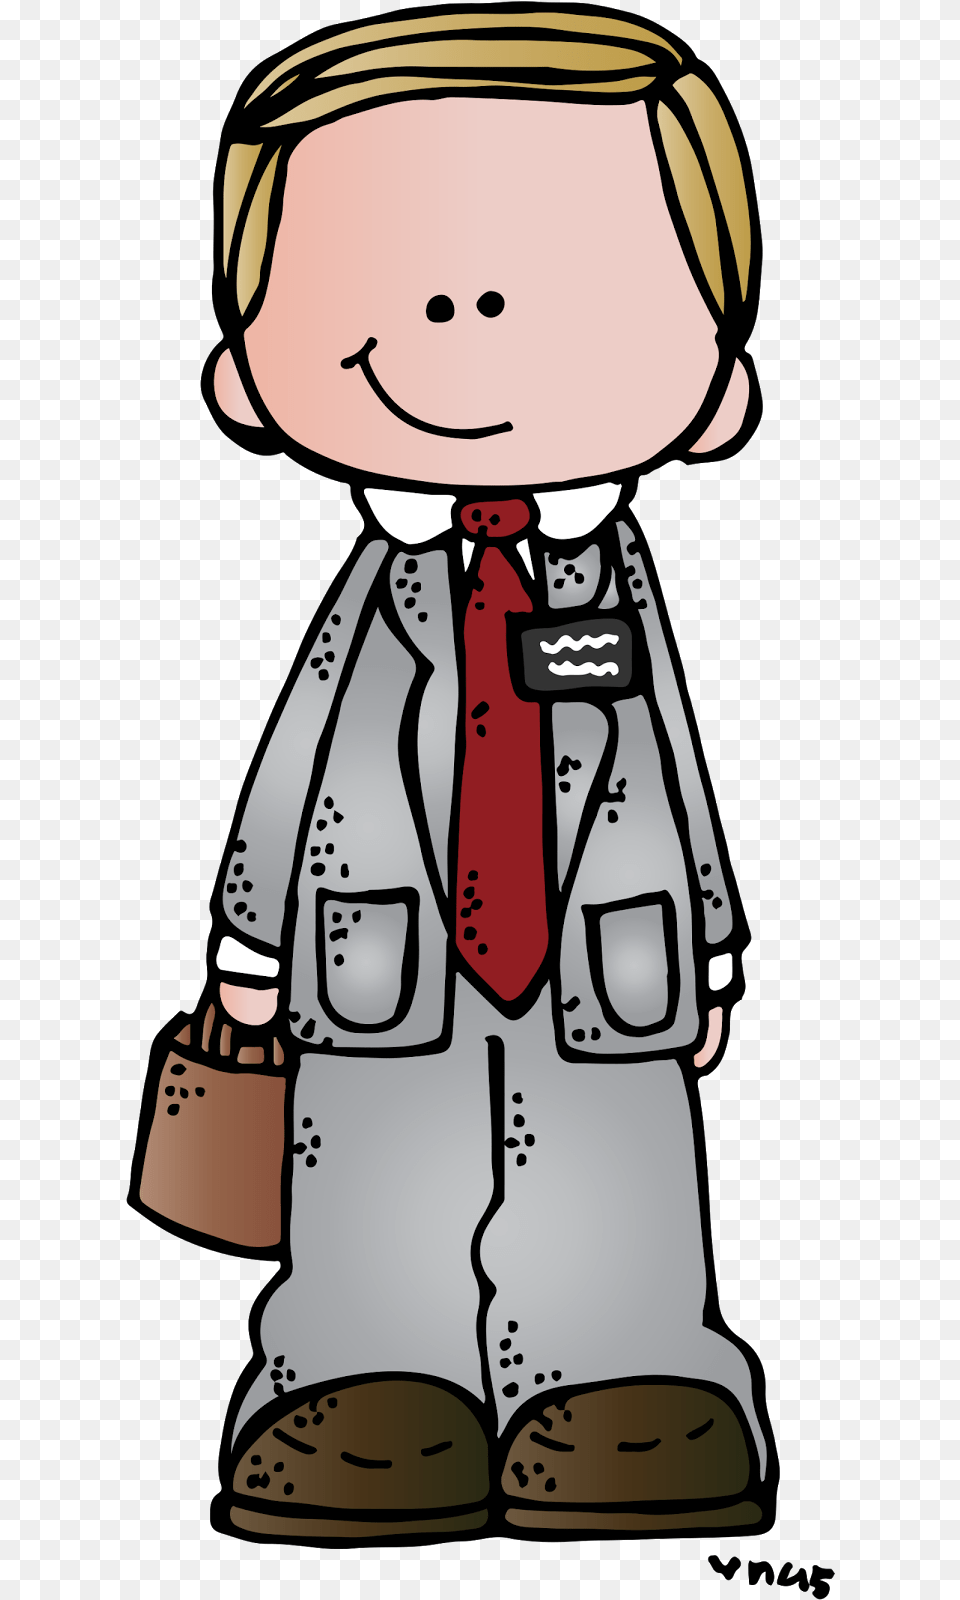 Lds Missionary Cartoon Transparent Lds Missionary Cartoon, Accessories, Formal Wear, Tie, Book Png